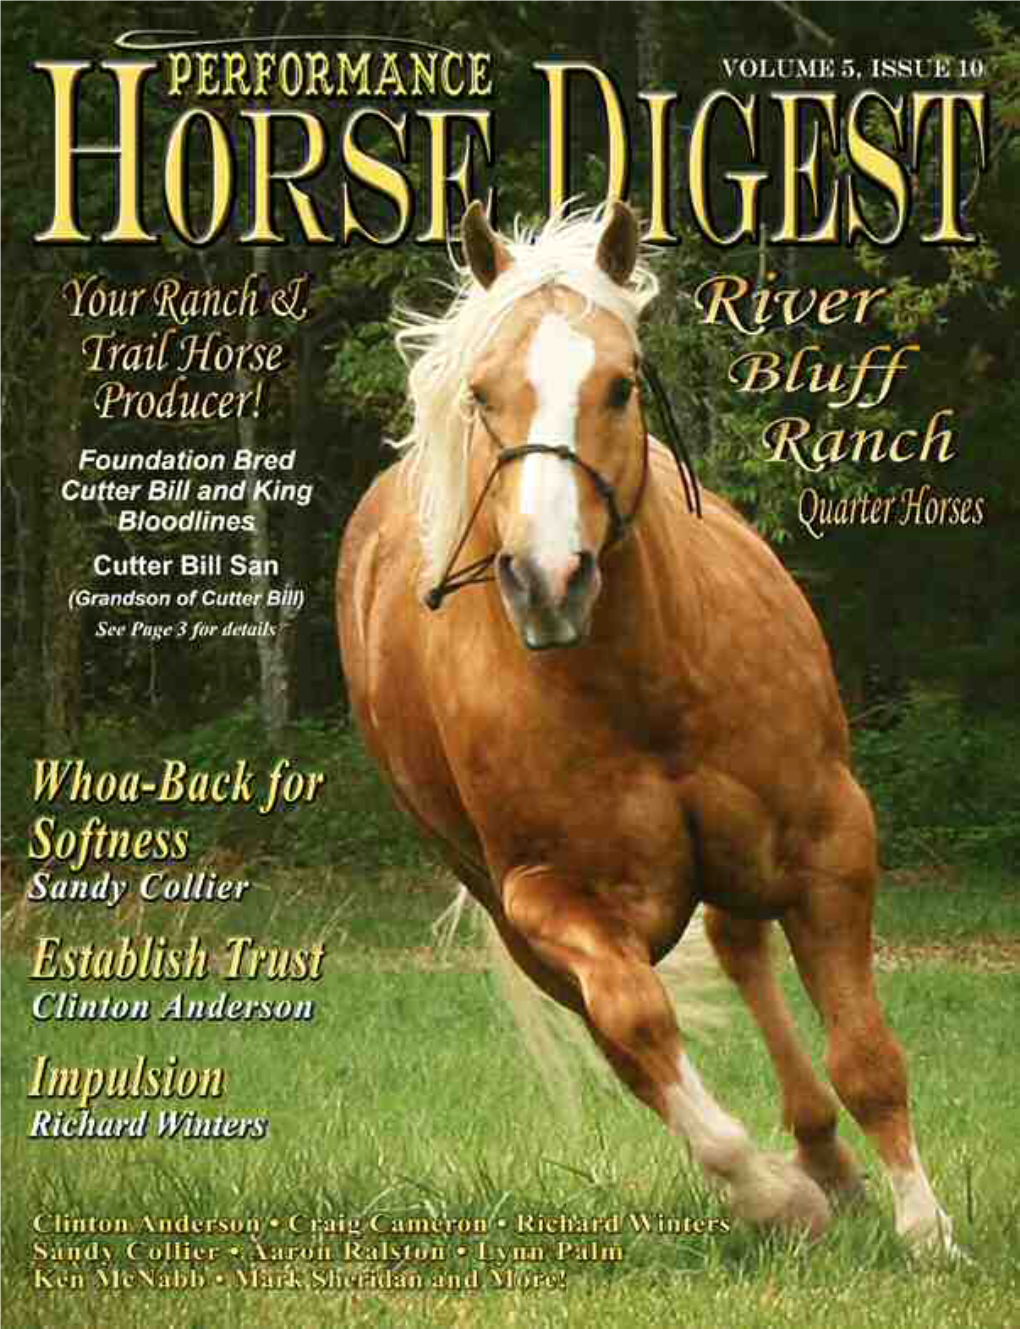 COMPLETE Horse Digest Cover and Article.Pdf